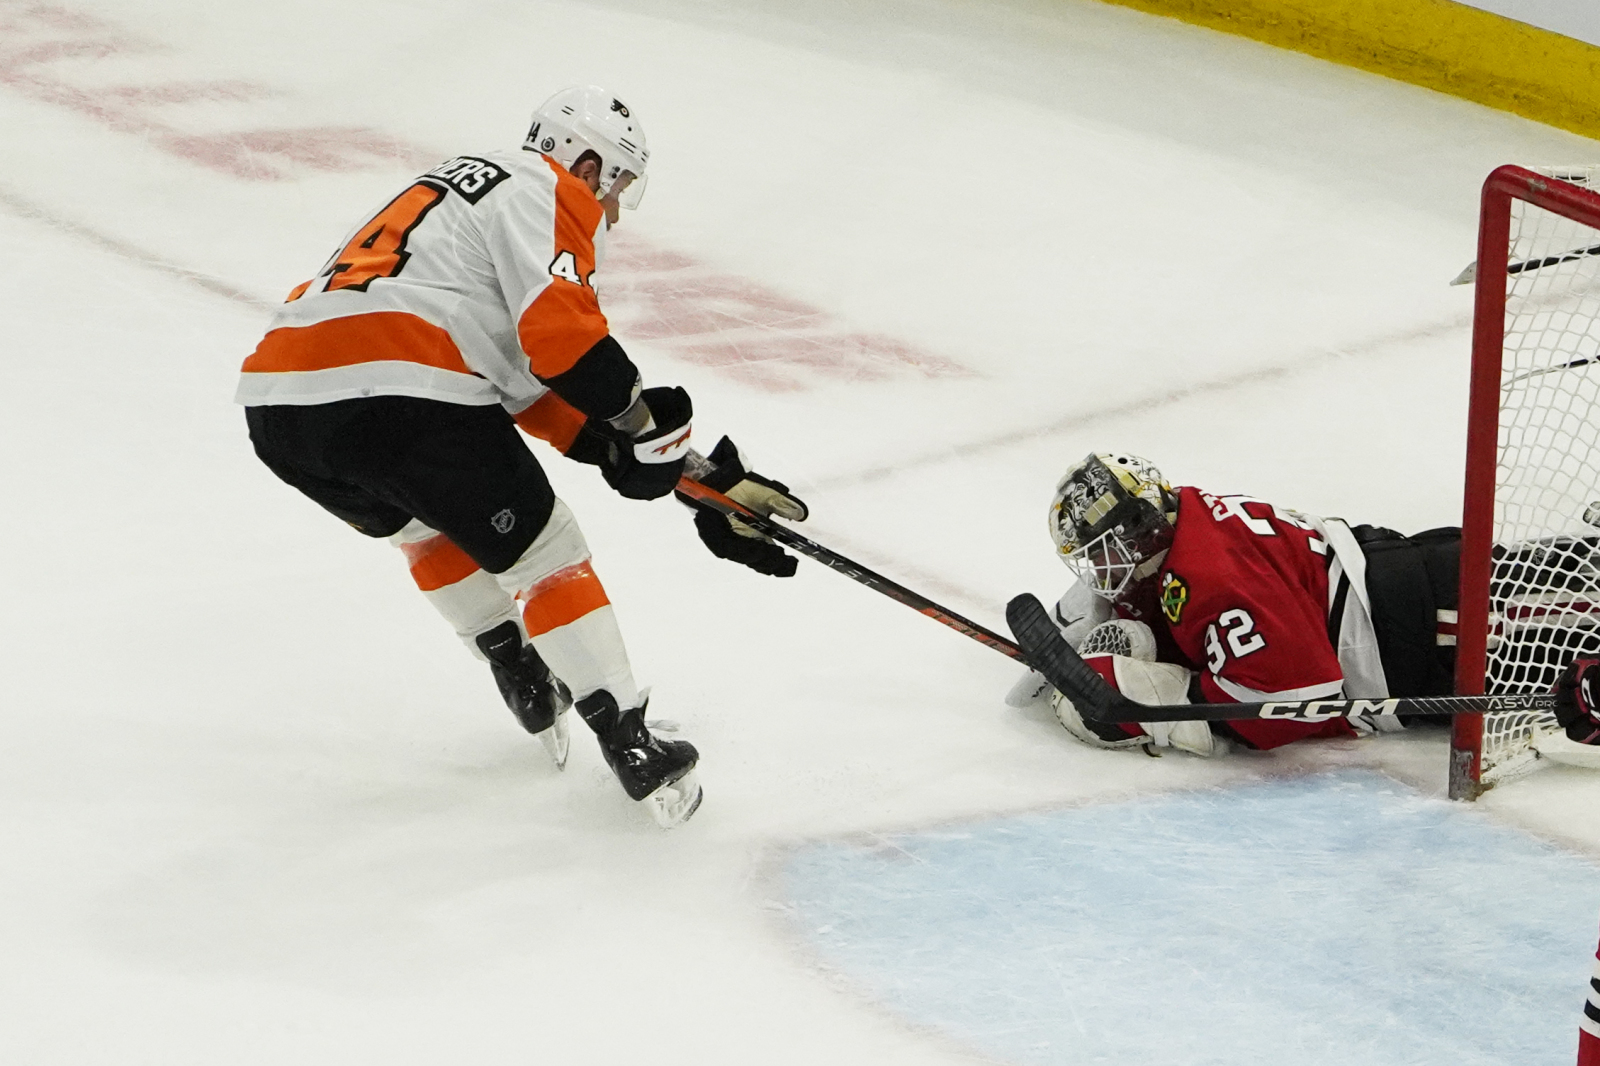 Flyers are biggest winners as Briere plays strong for Phantoms